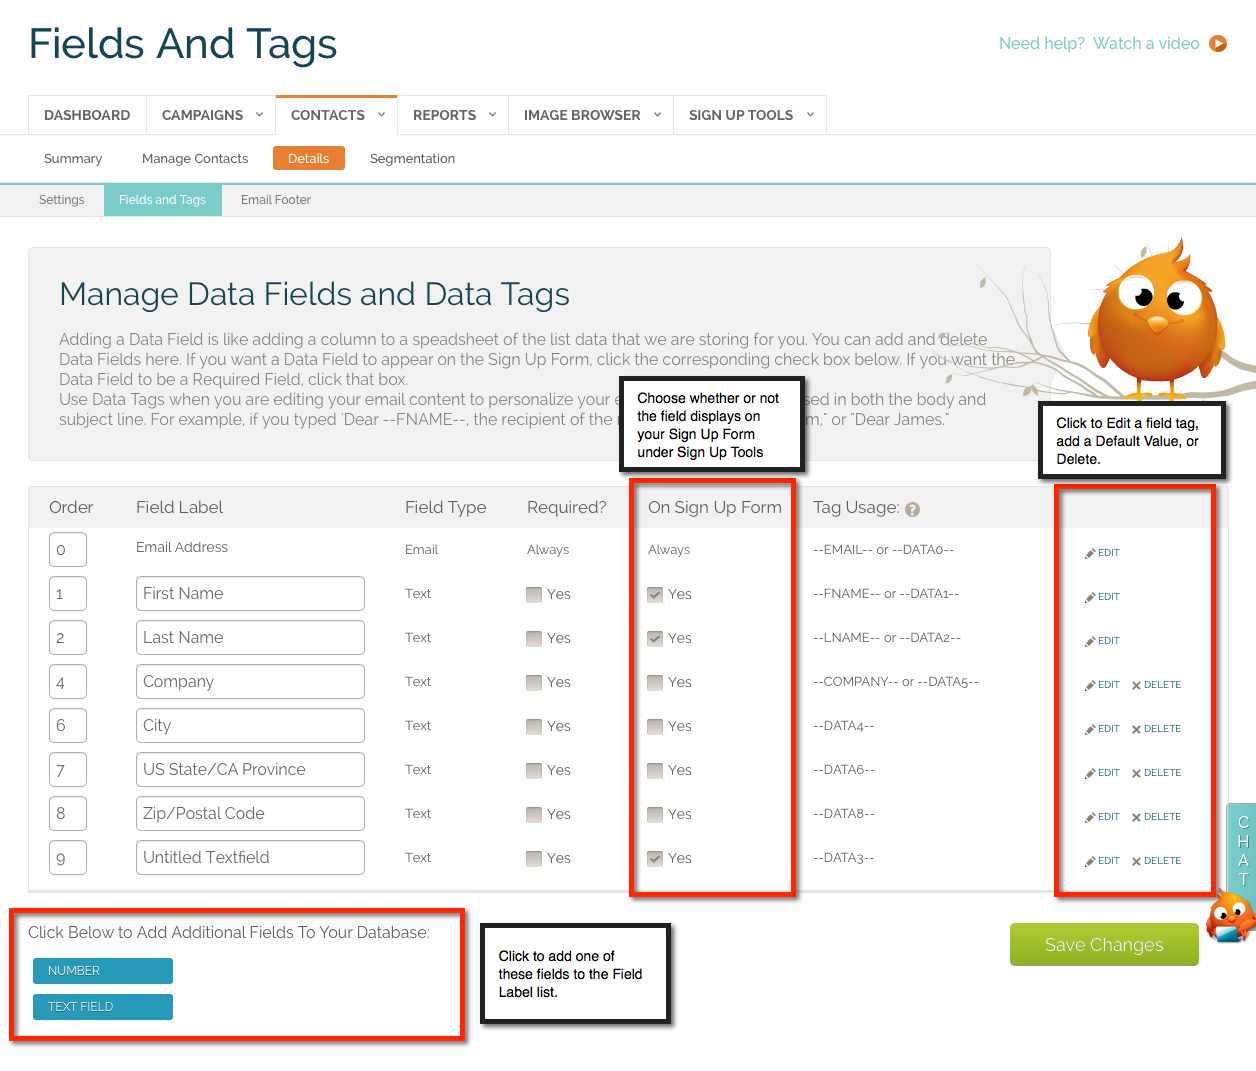 Manage Fields and Tags